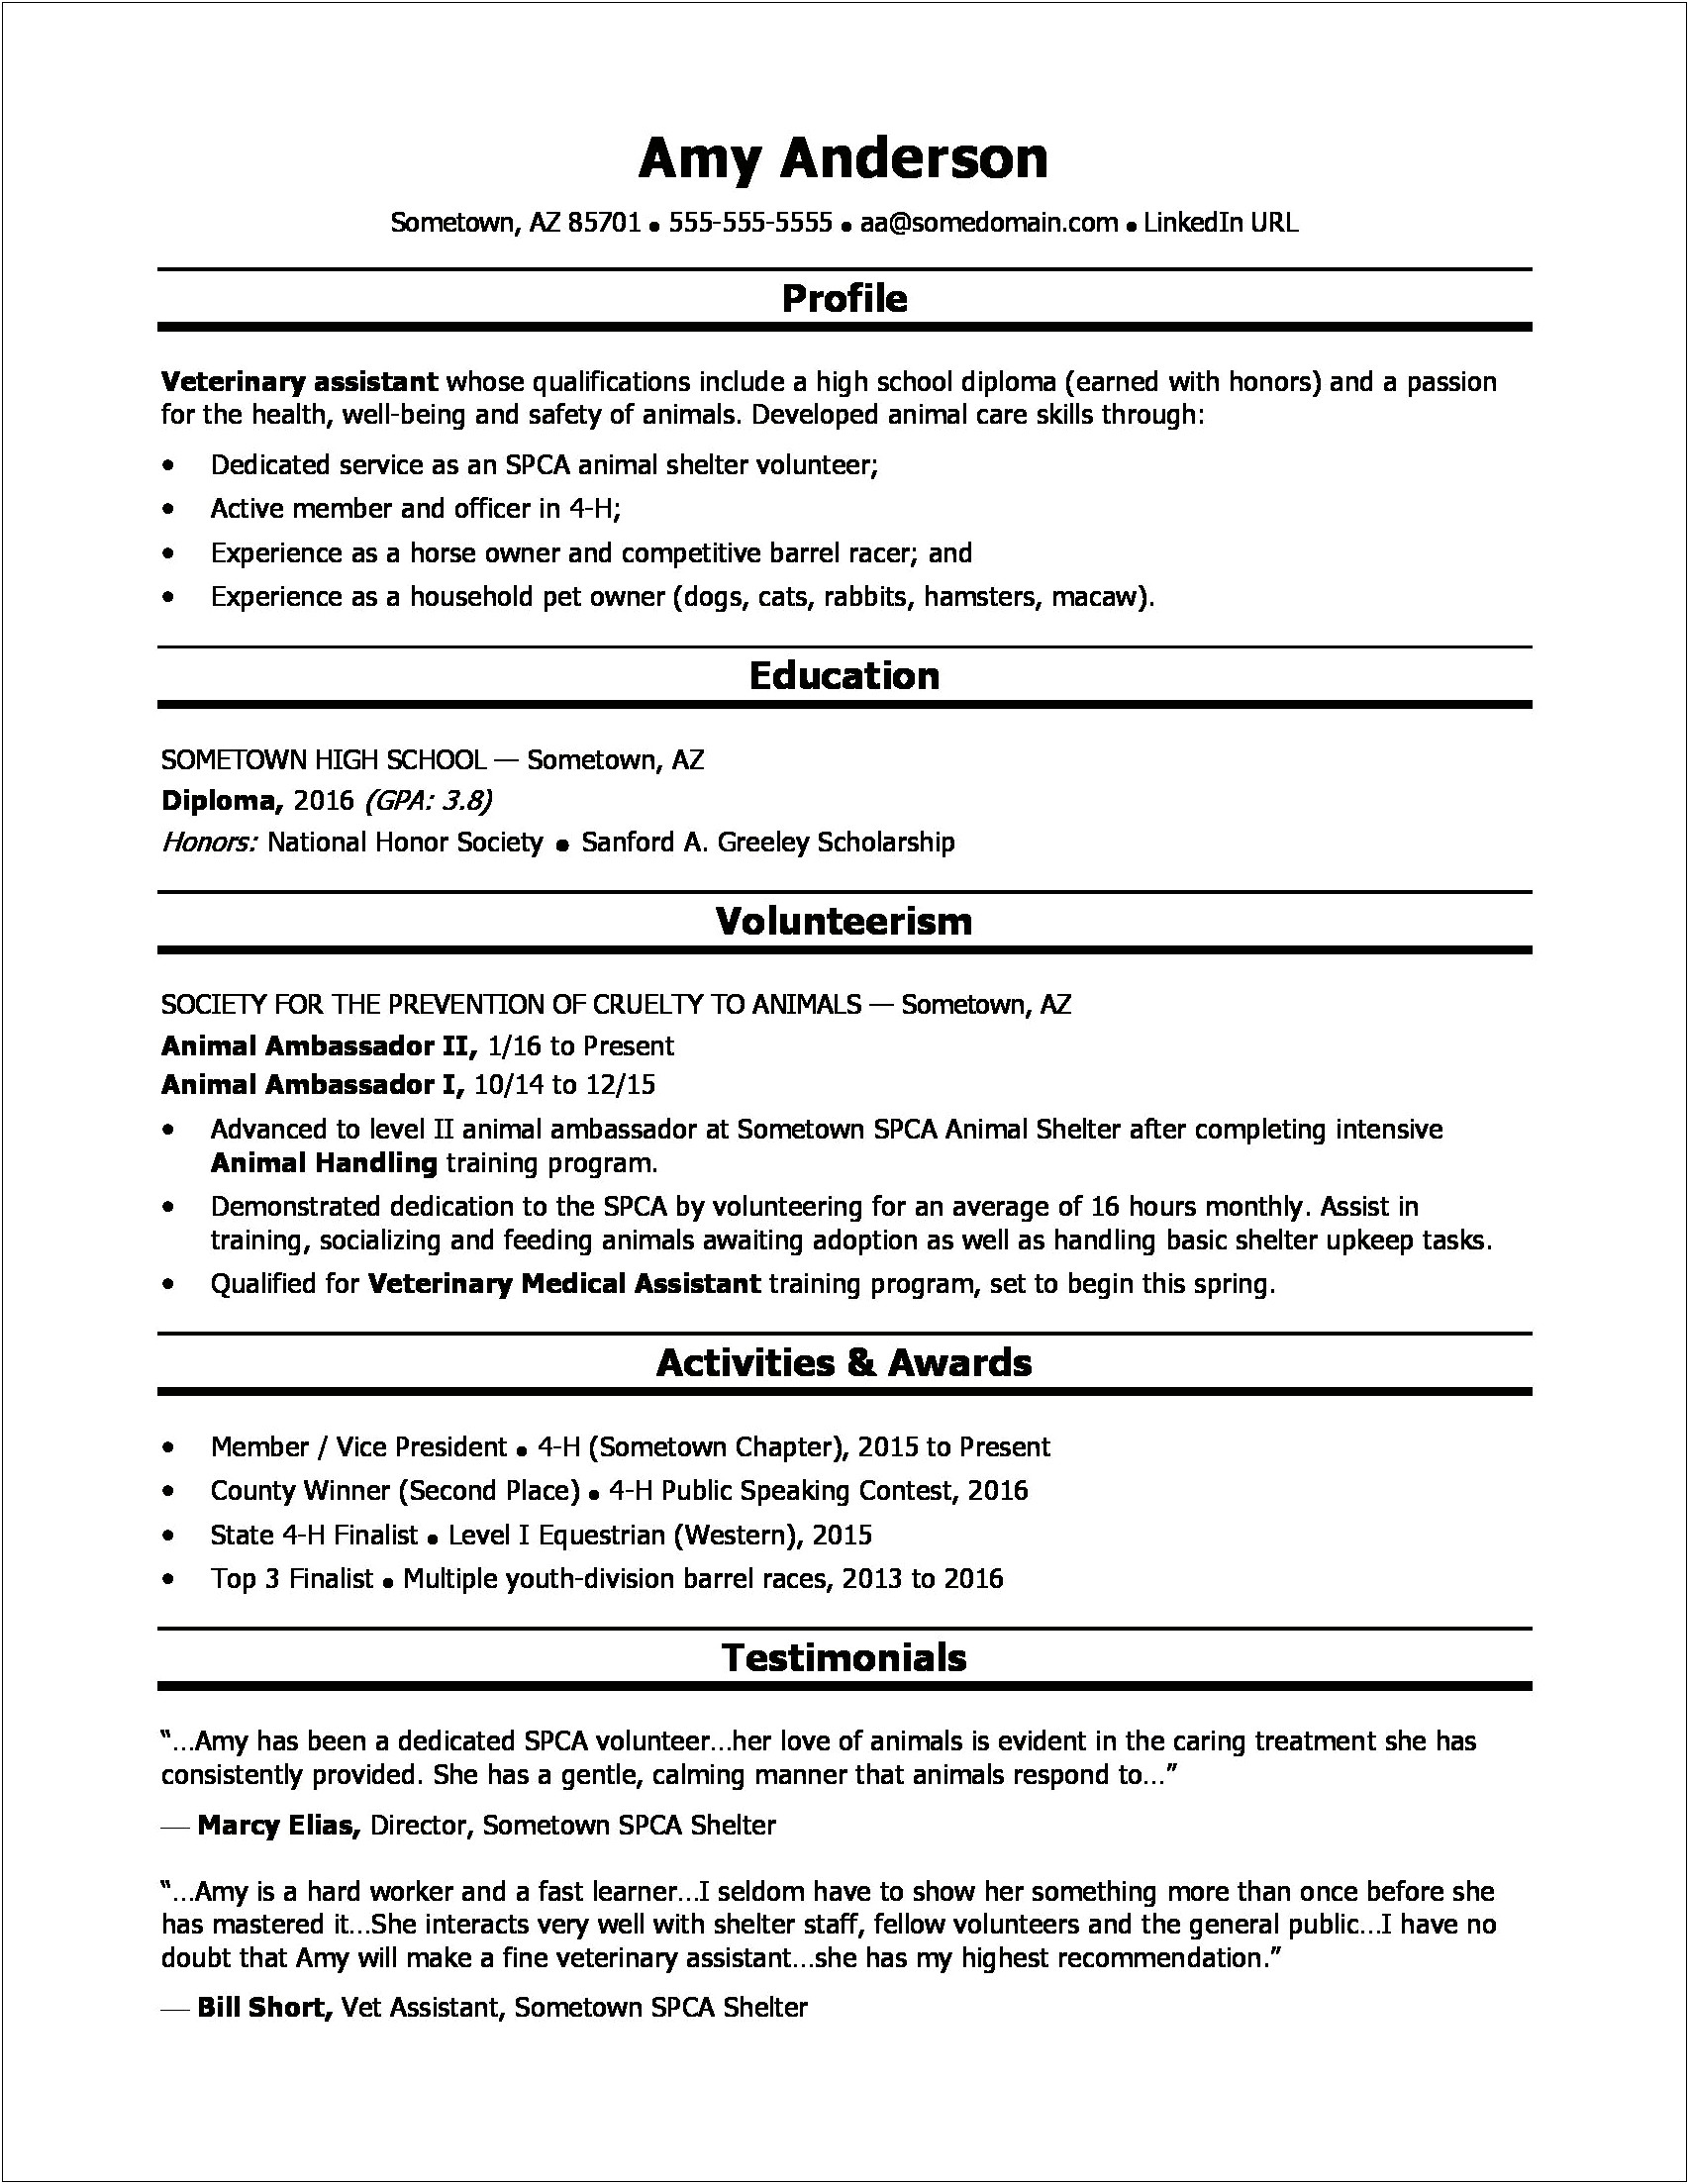 Good Sample Resumes For High School Students